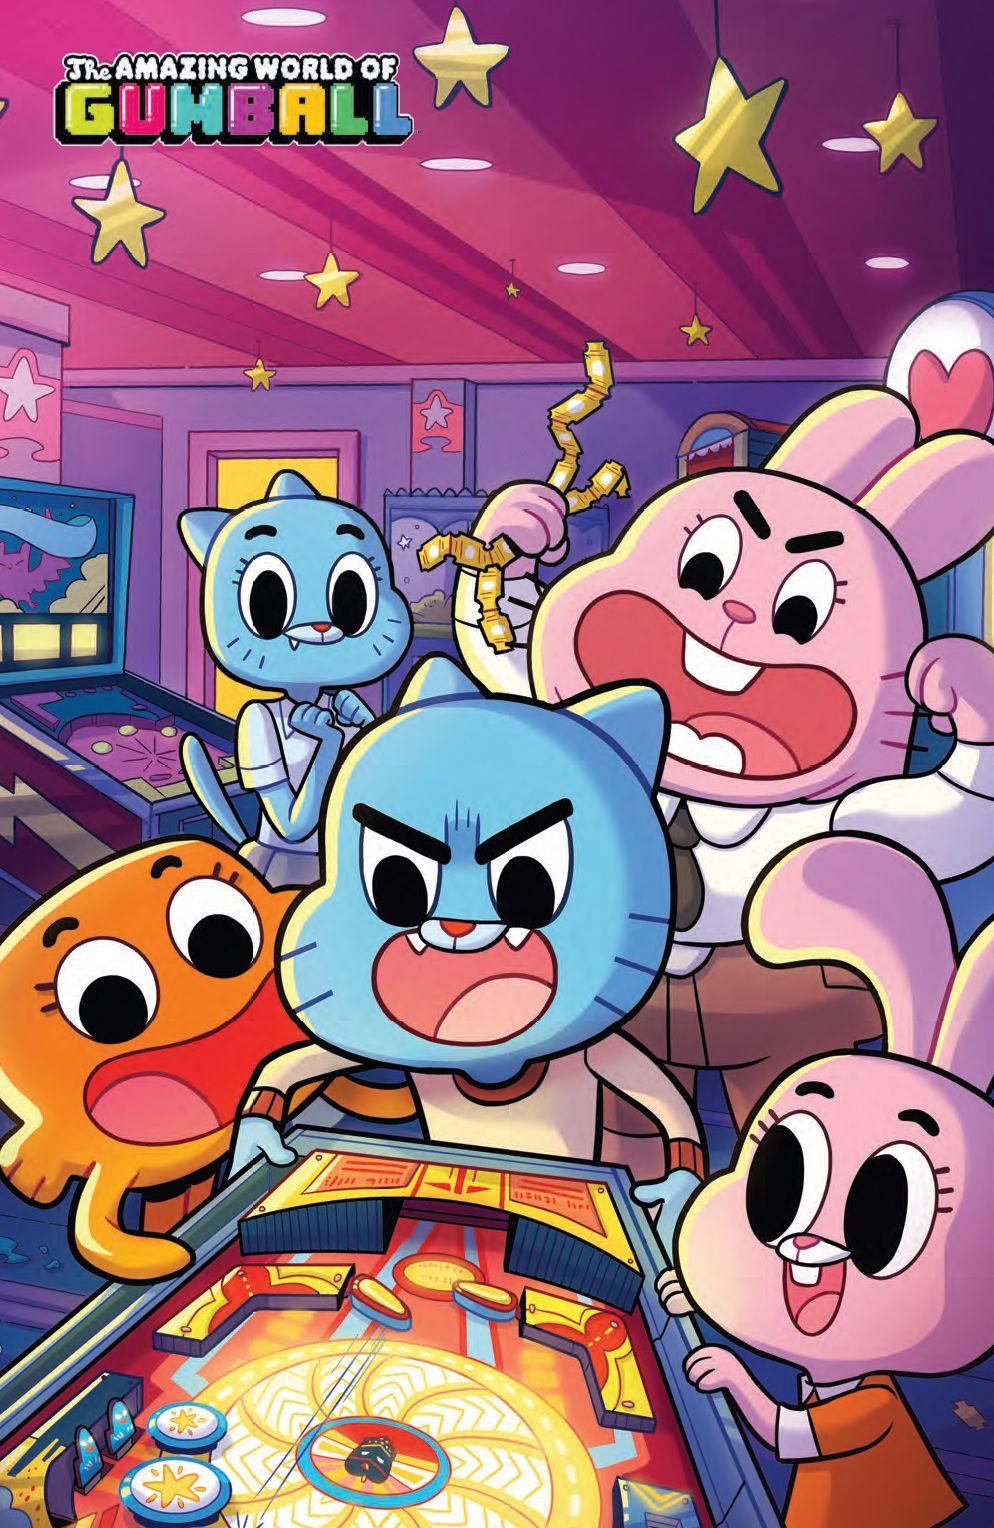 Interview: Frank Gibson takes on THE AMAZING WORLD OF GUMBALL at